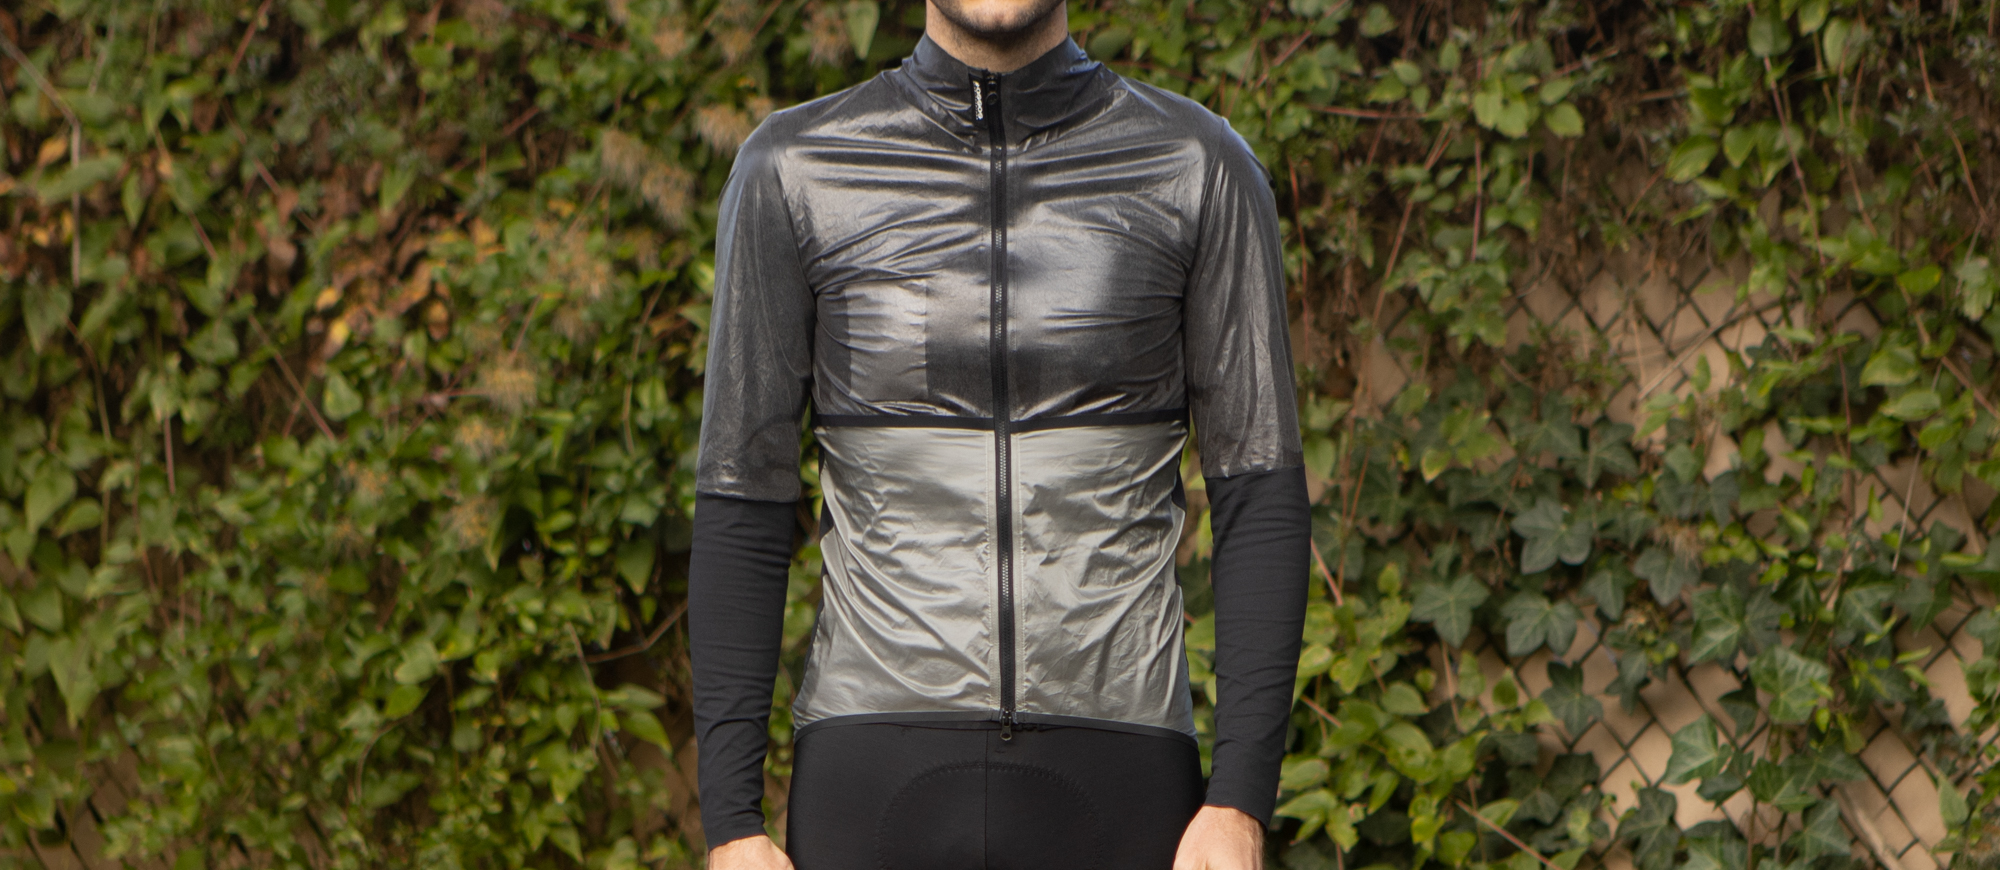 Assos Equipe RS Clima Capsule Alleycat review | Cyclingnews